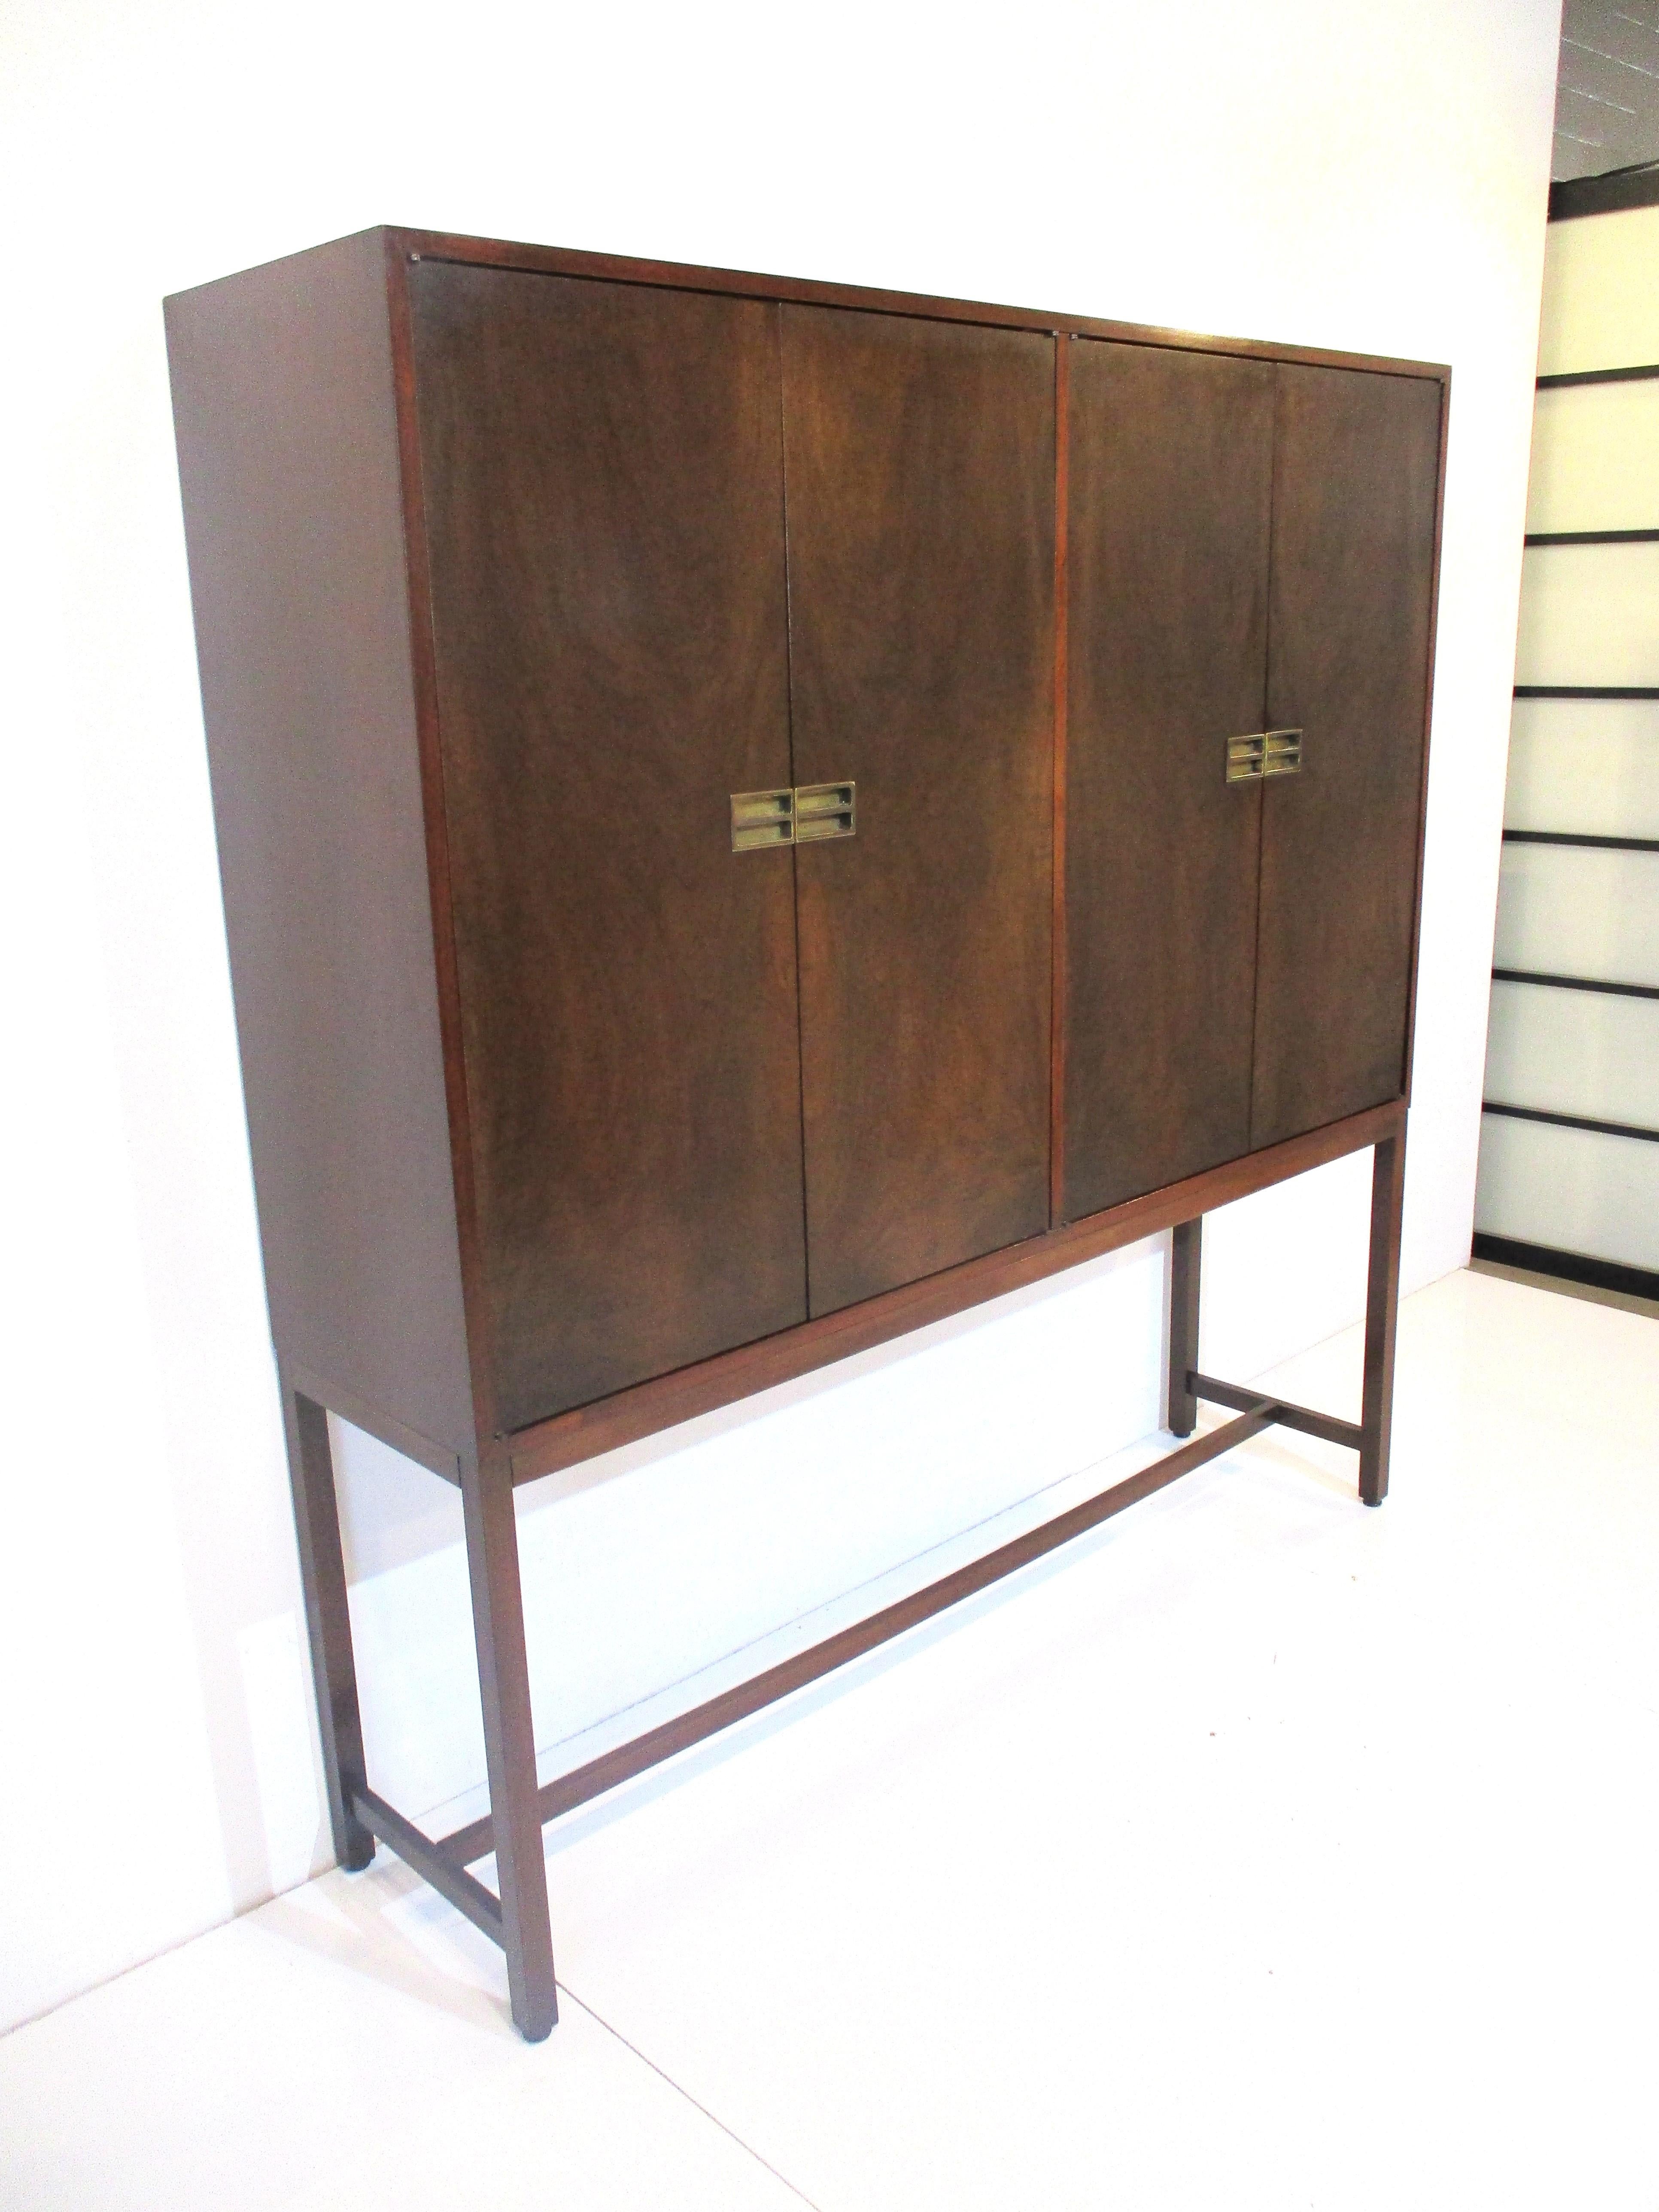 A very well crafted two piece four door cabinet with book matched wood grained fronts opening to revel two glass and two wooden adjustable shelves with two smaller drawers one with dividers. The doors have brass pulls that have a nice textured look